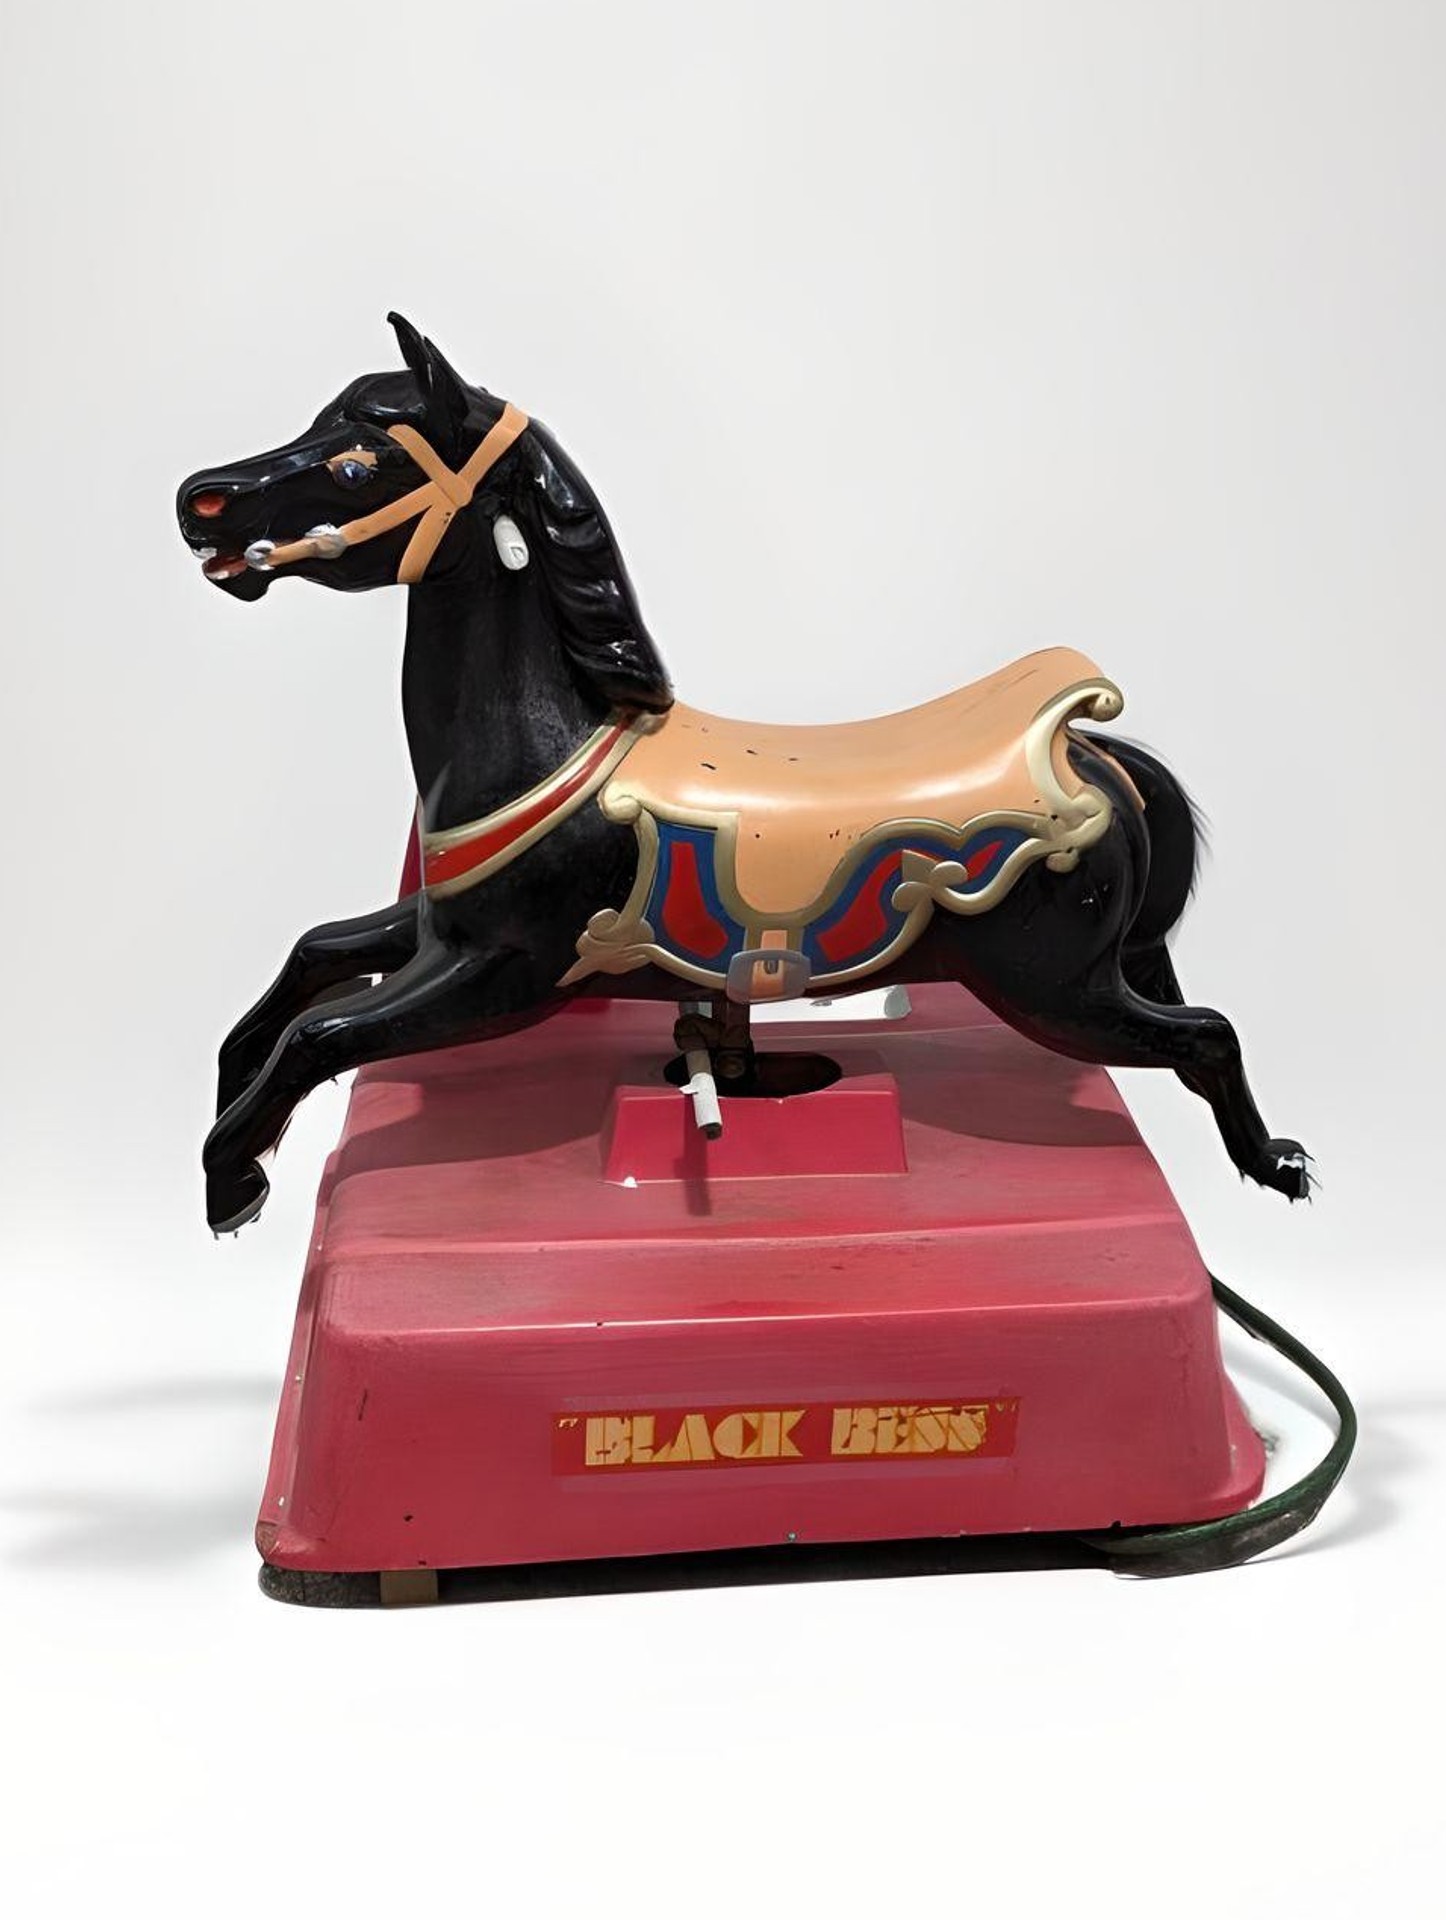 children's coin operated horse ride